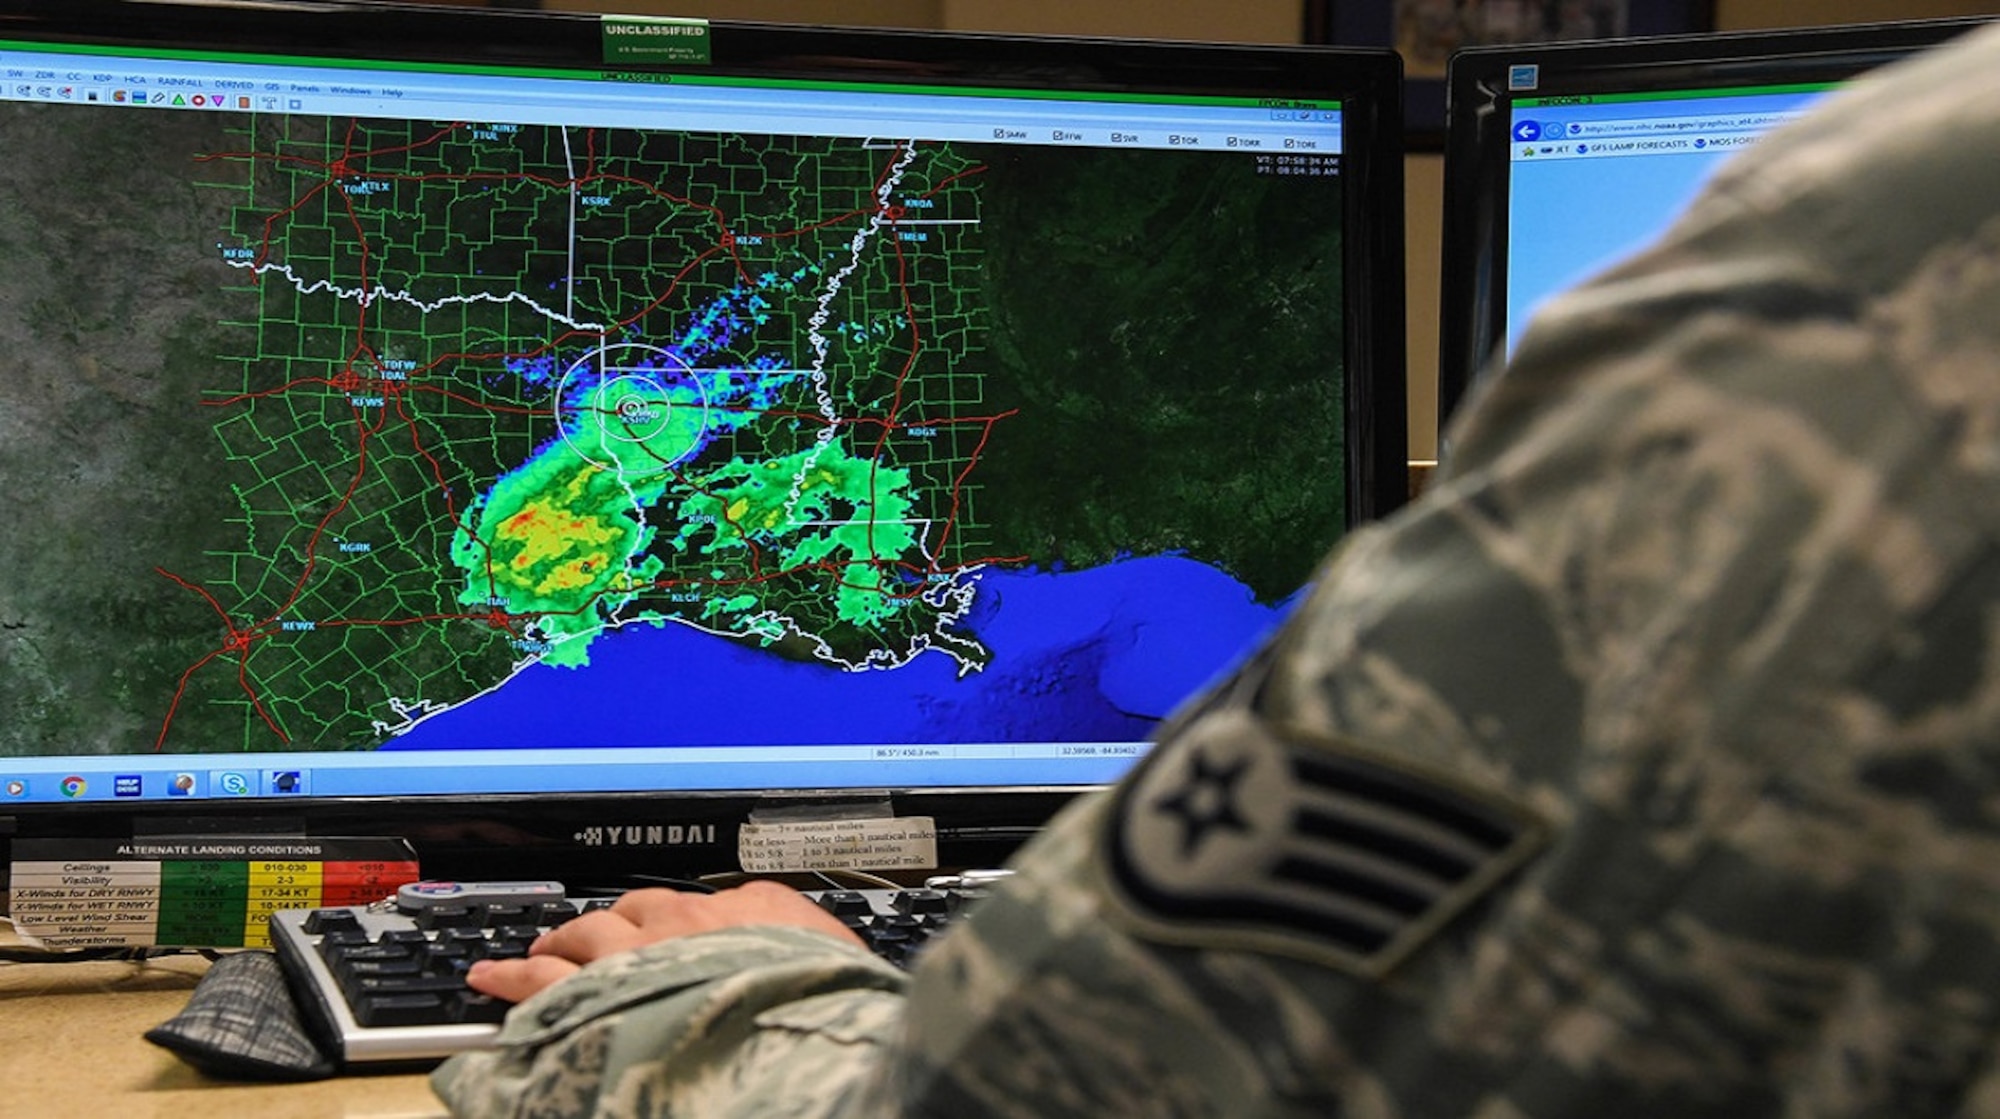 Headquartered at Offutt Air Force Base, Nebraska, the wing exploits weather information through around-the-clock authoritative terrestrial and space-environmental data, analyses, forecasts, threat-warning and threat-mitigation products and services.